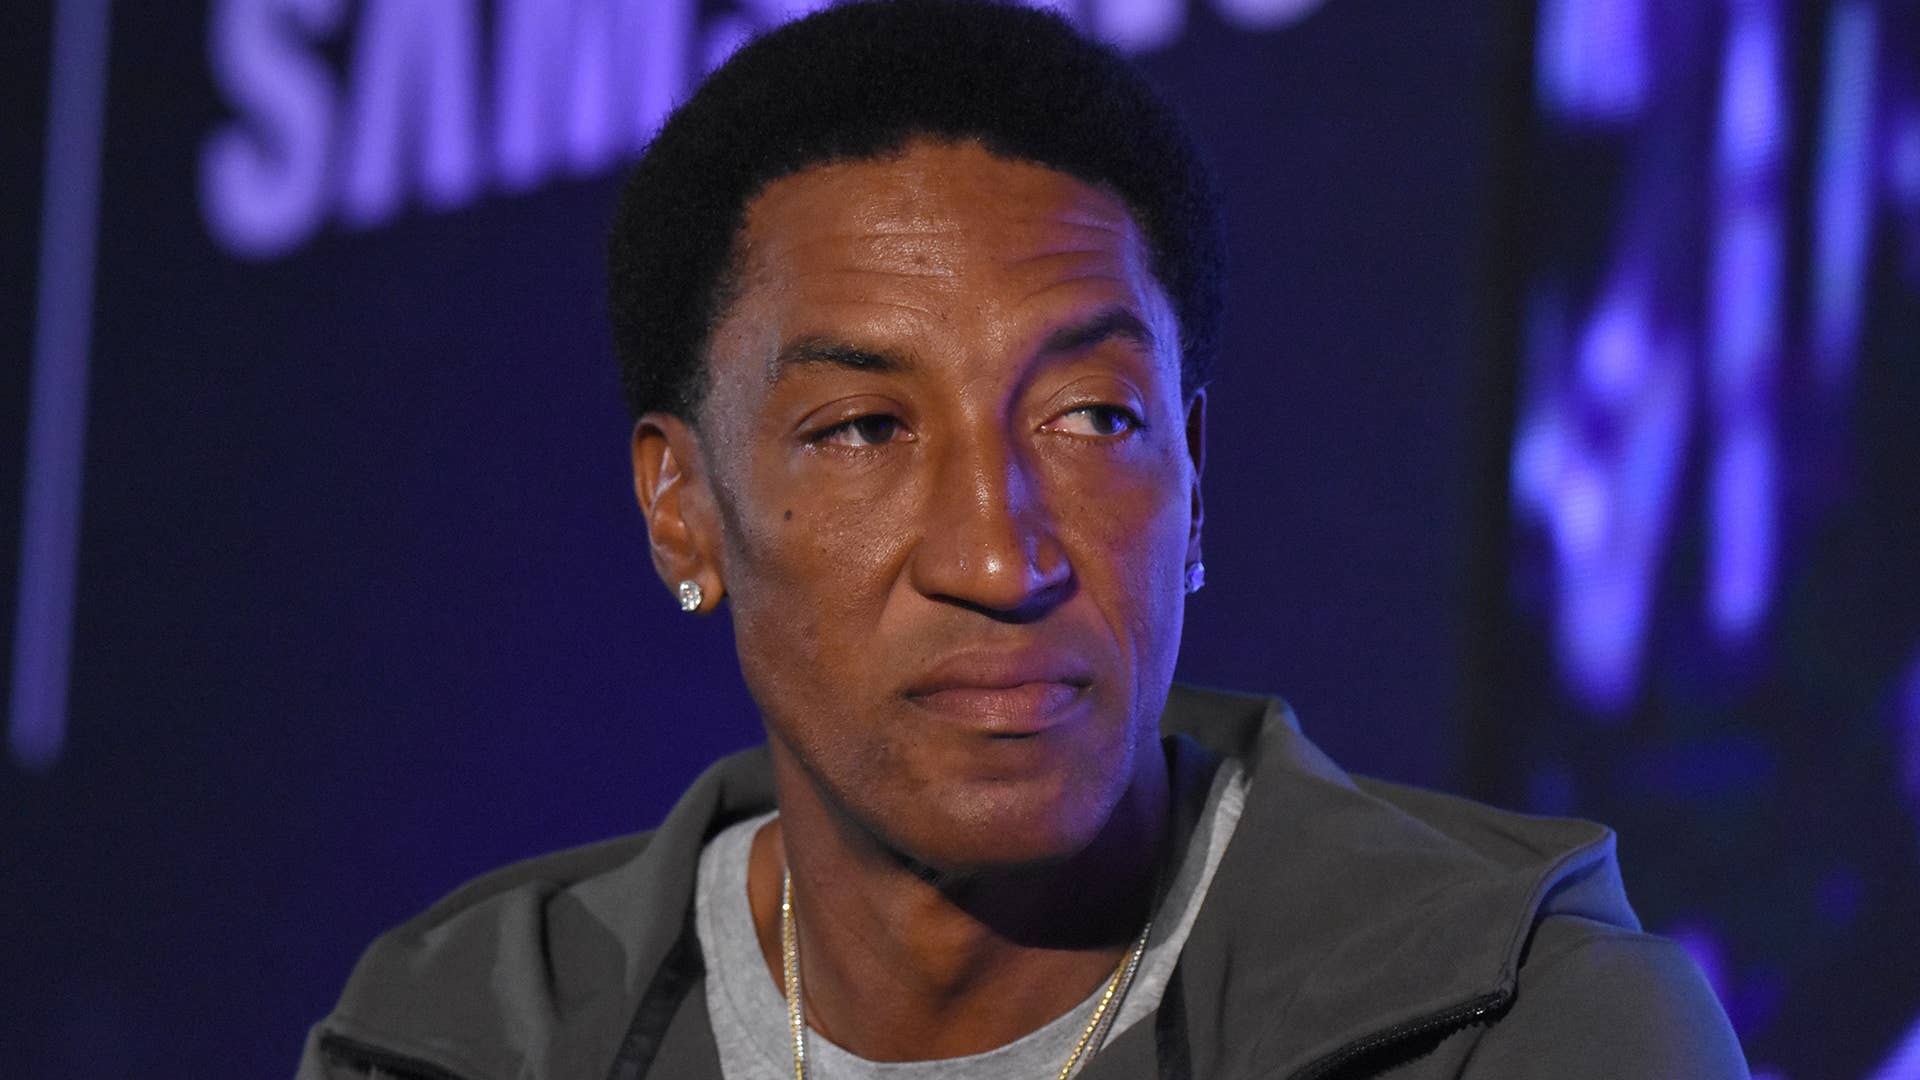 This is a photo of Scottie Pippen